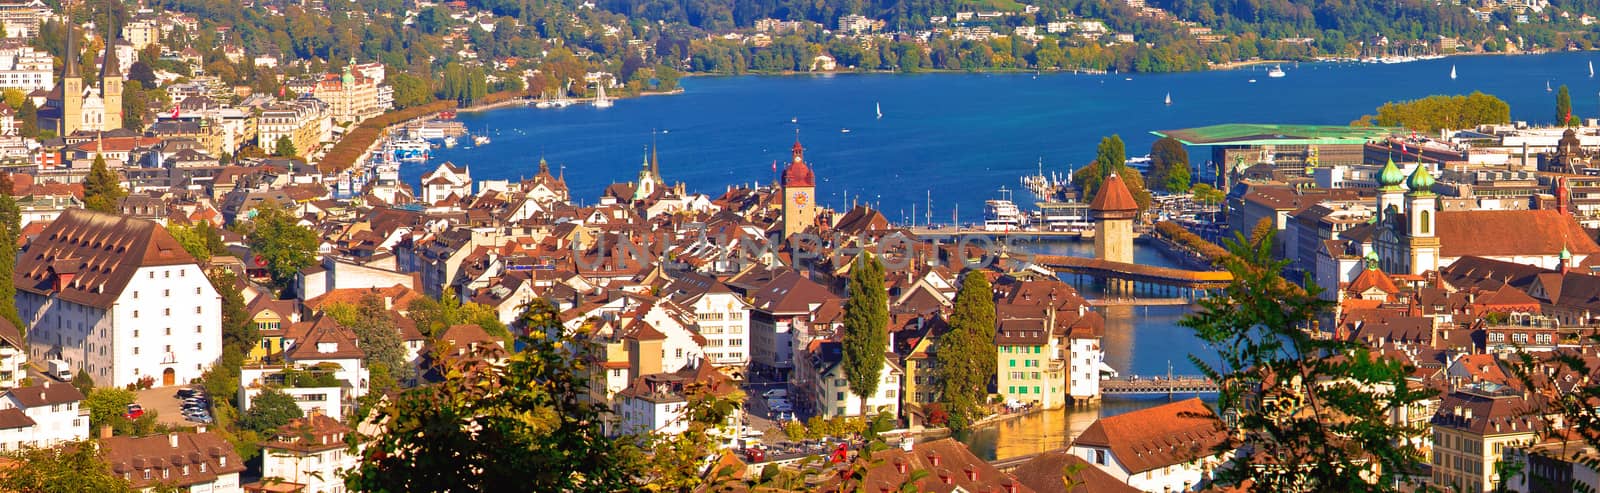 City and lake of Luzern panoramic aerial view, Alps and lakes in Switzerland